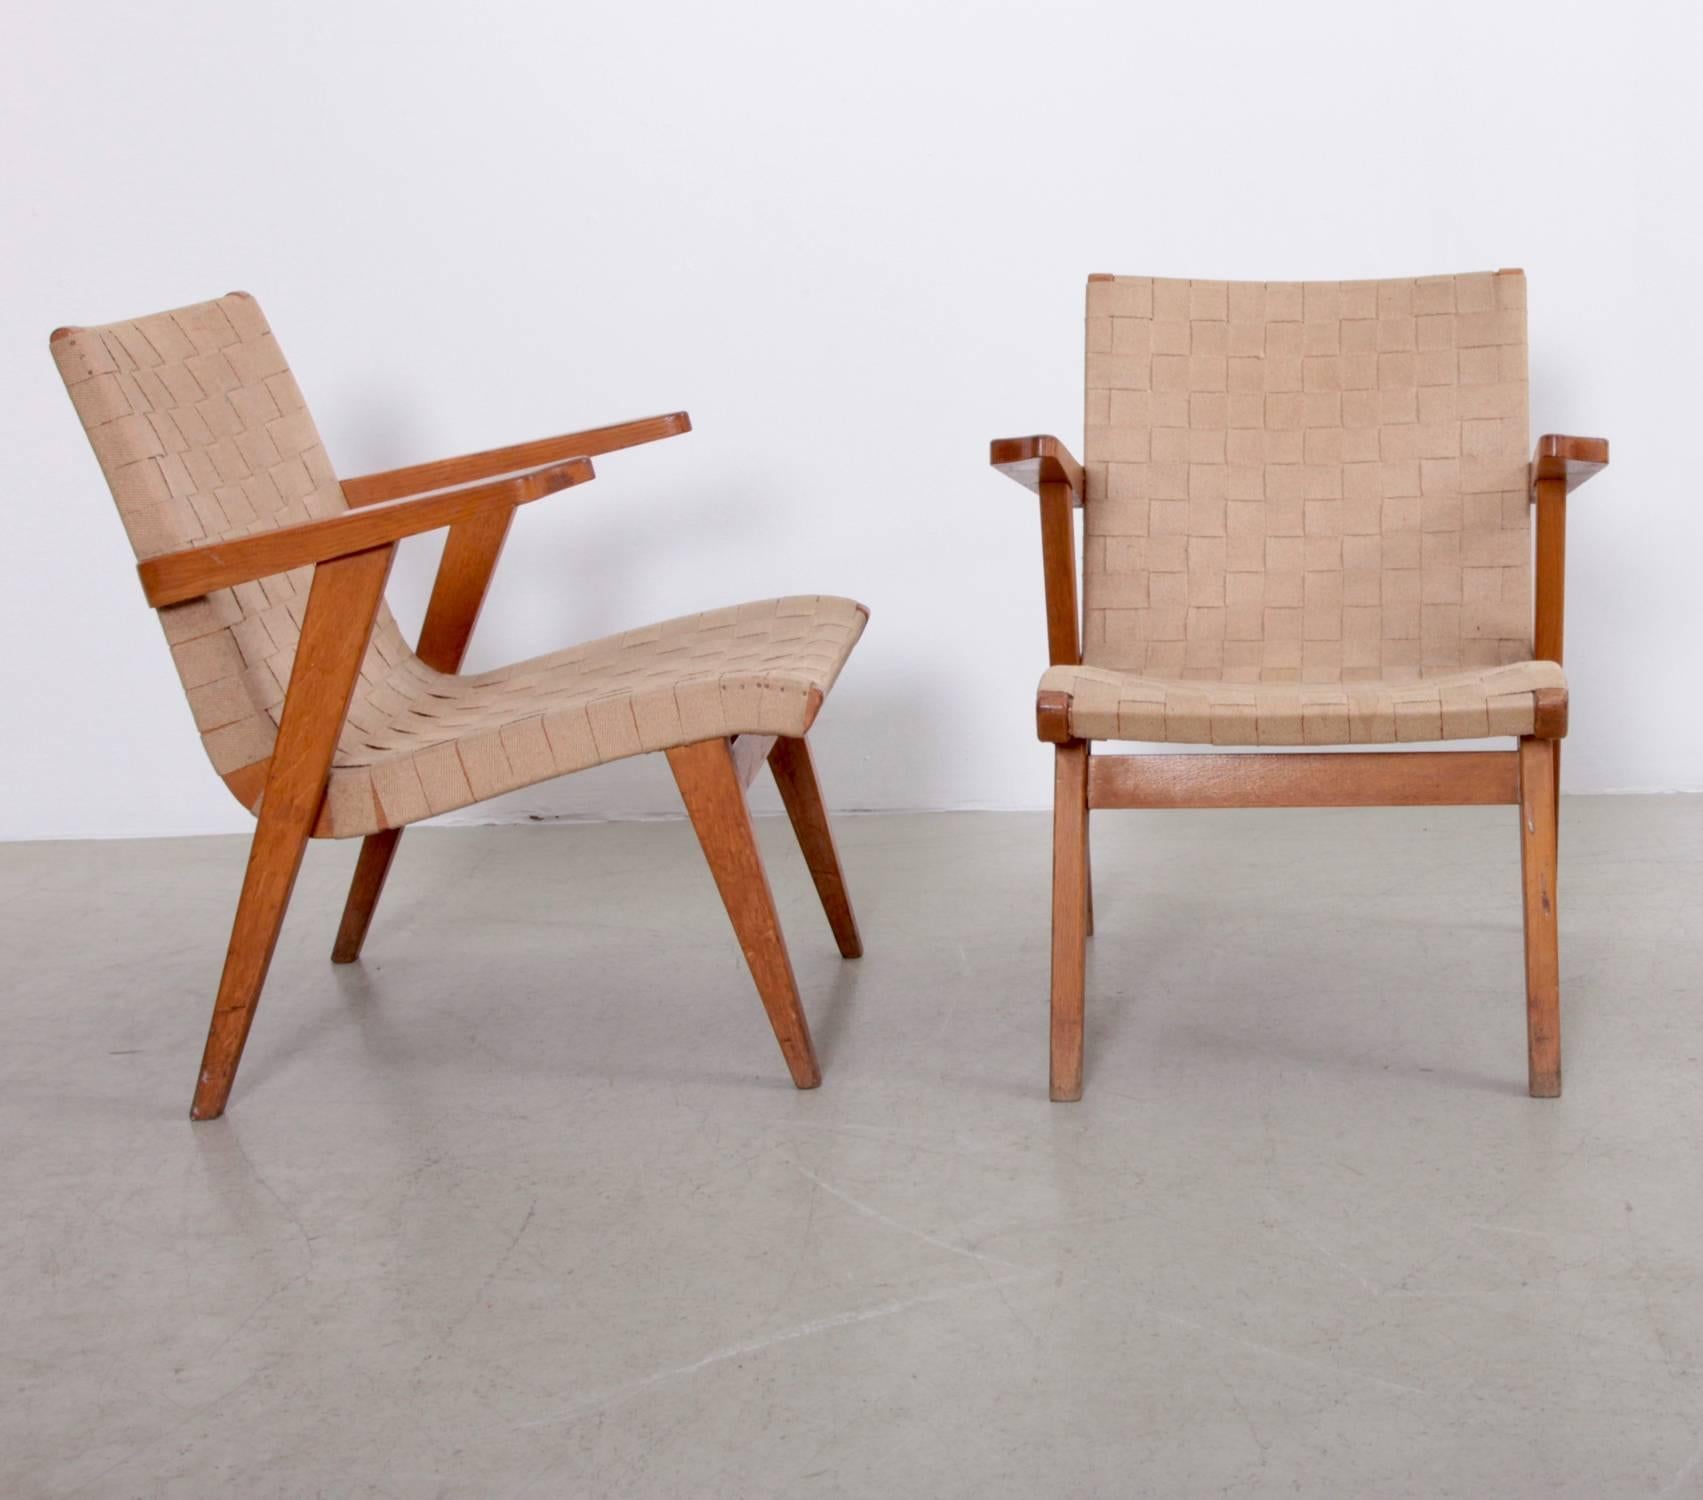 Rare pair of Jens Risom lounge chairs with arm rests by Knoll, France.
Knoll produced the Risom Furniture only in France with oak. The webbing is an older reupholstery but very well done with a natural canvas webbing.

